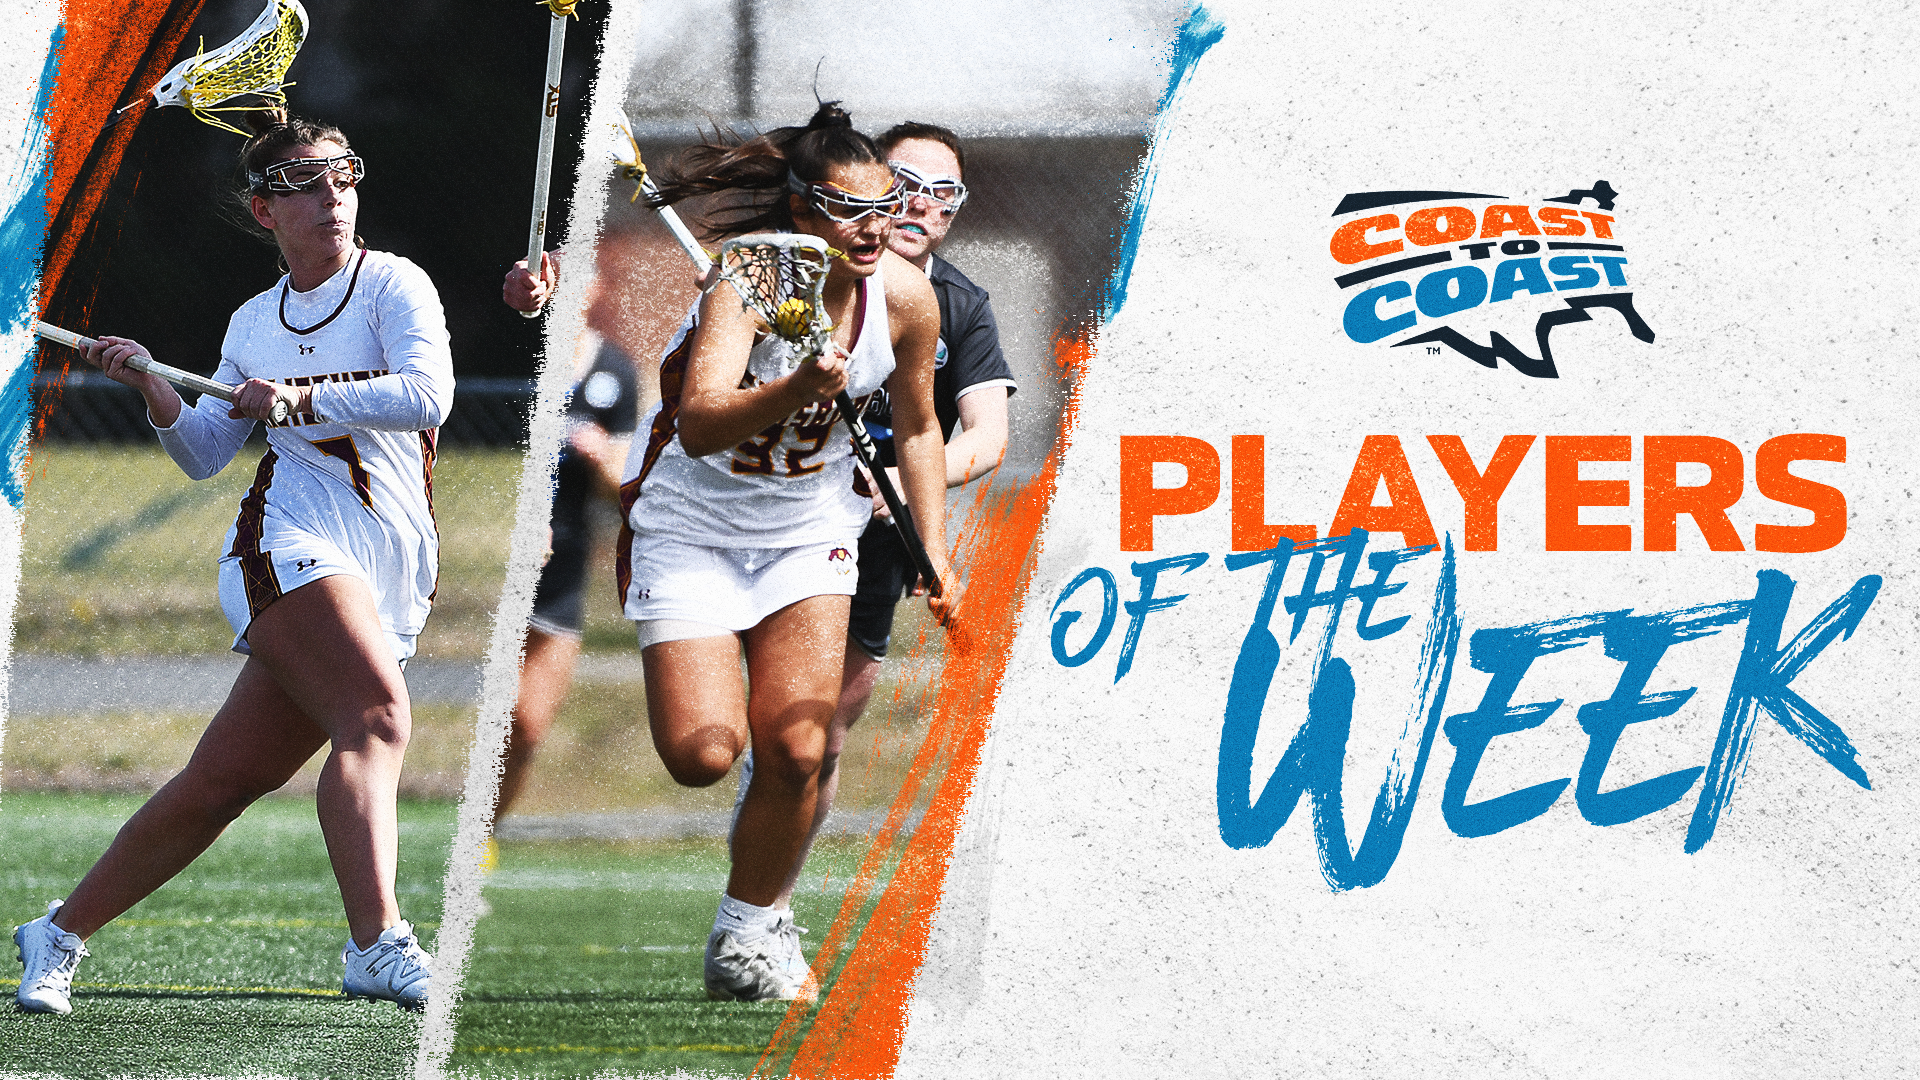 Salisbury’s Hanzsche and Davis Collect C2C Women's Lacrosse Player of the Week Awards